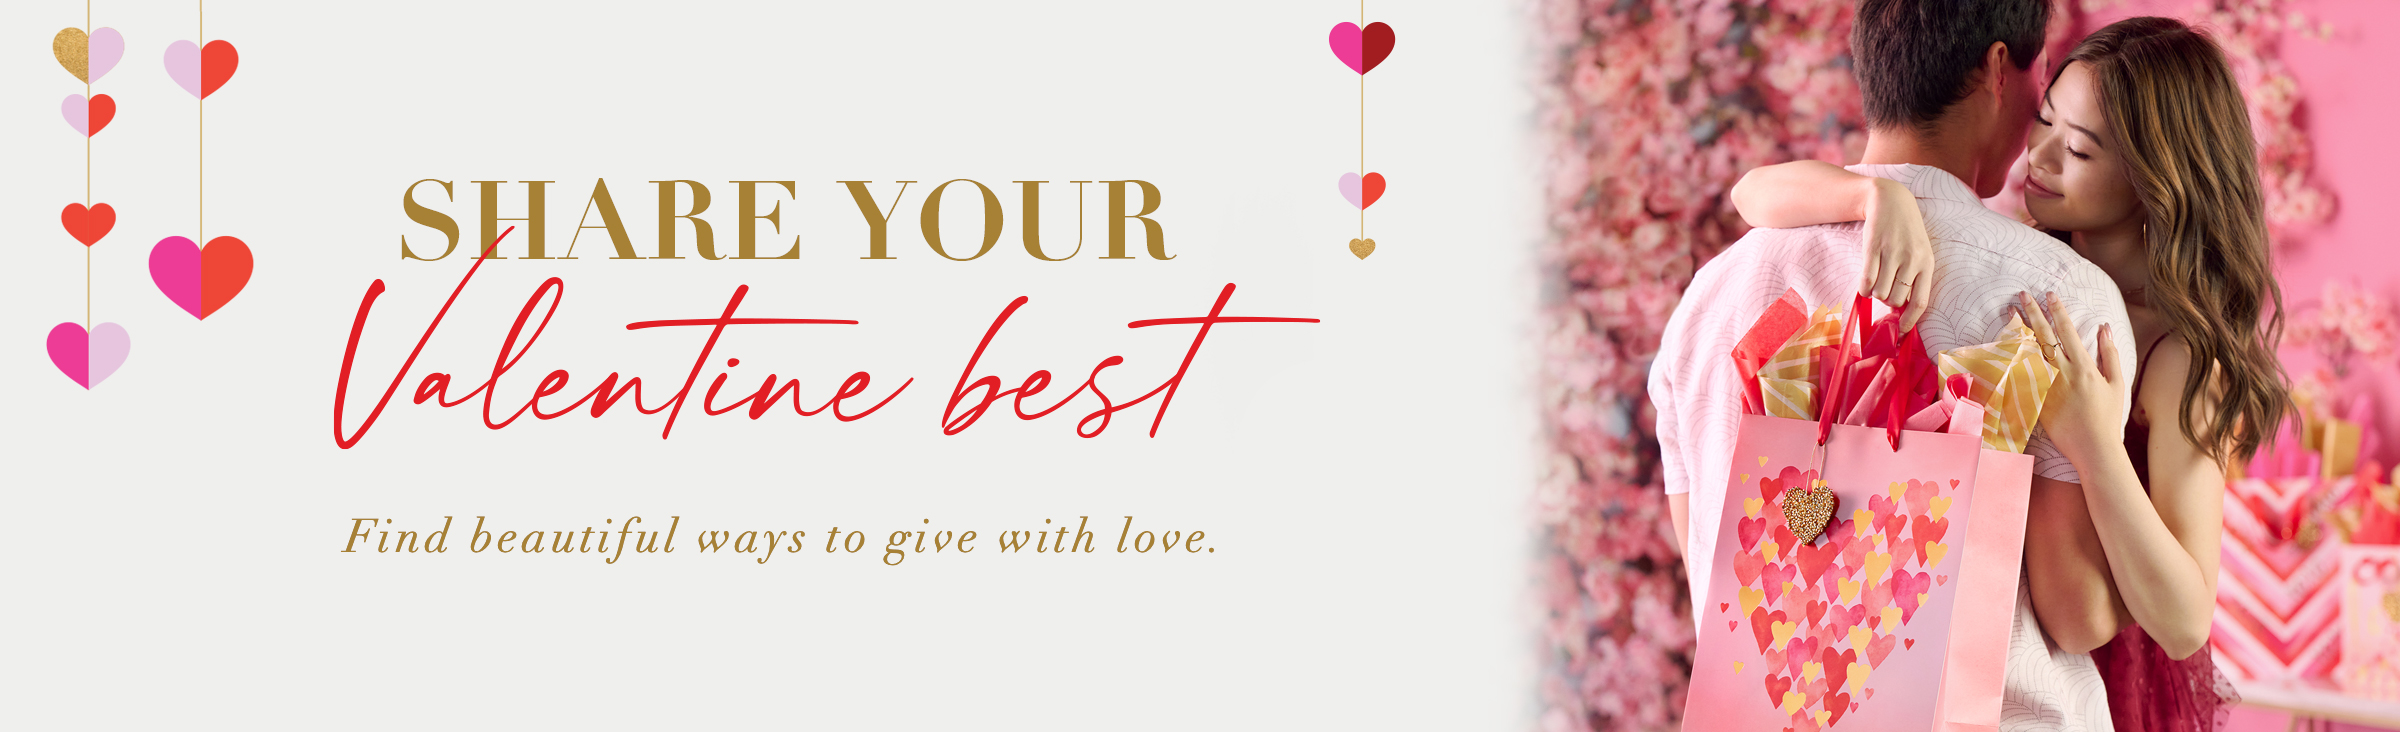 Share your Valentine Best Find beautiful ways to give with love.